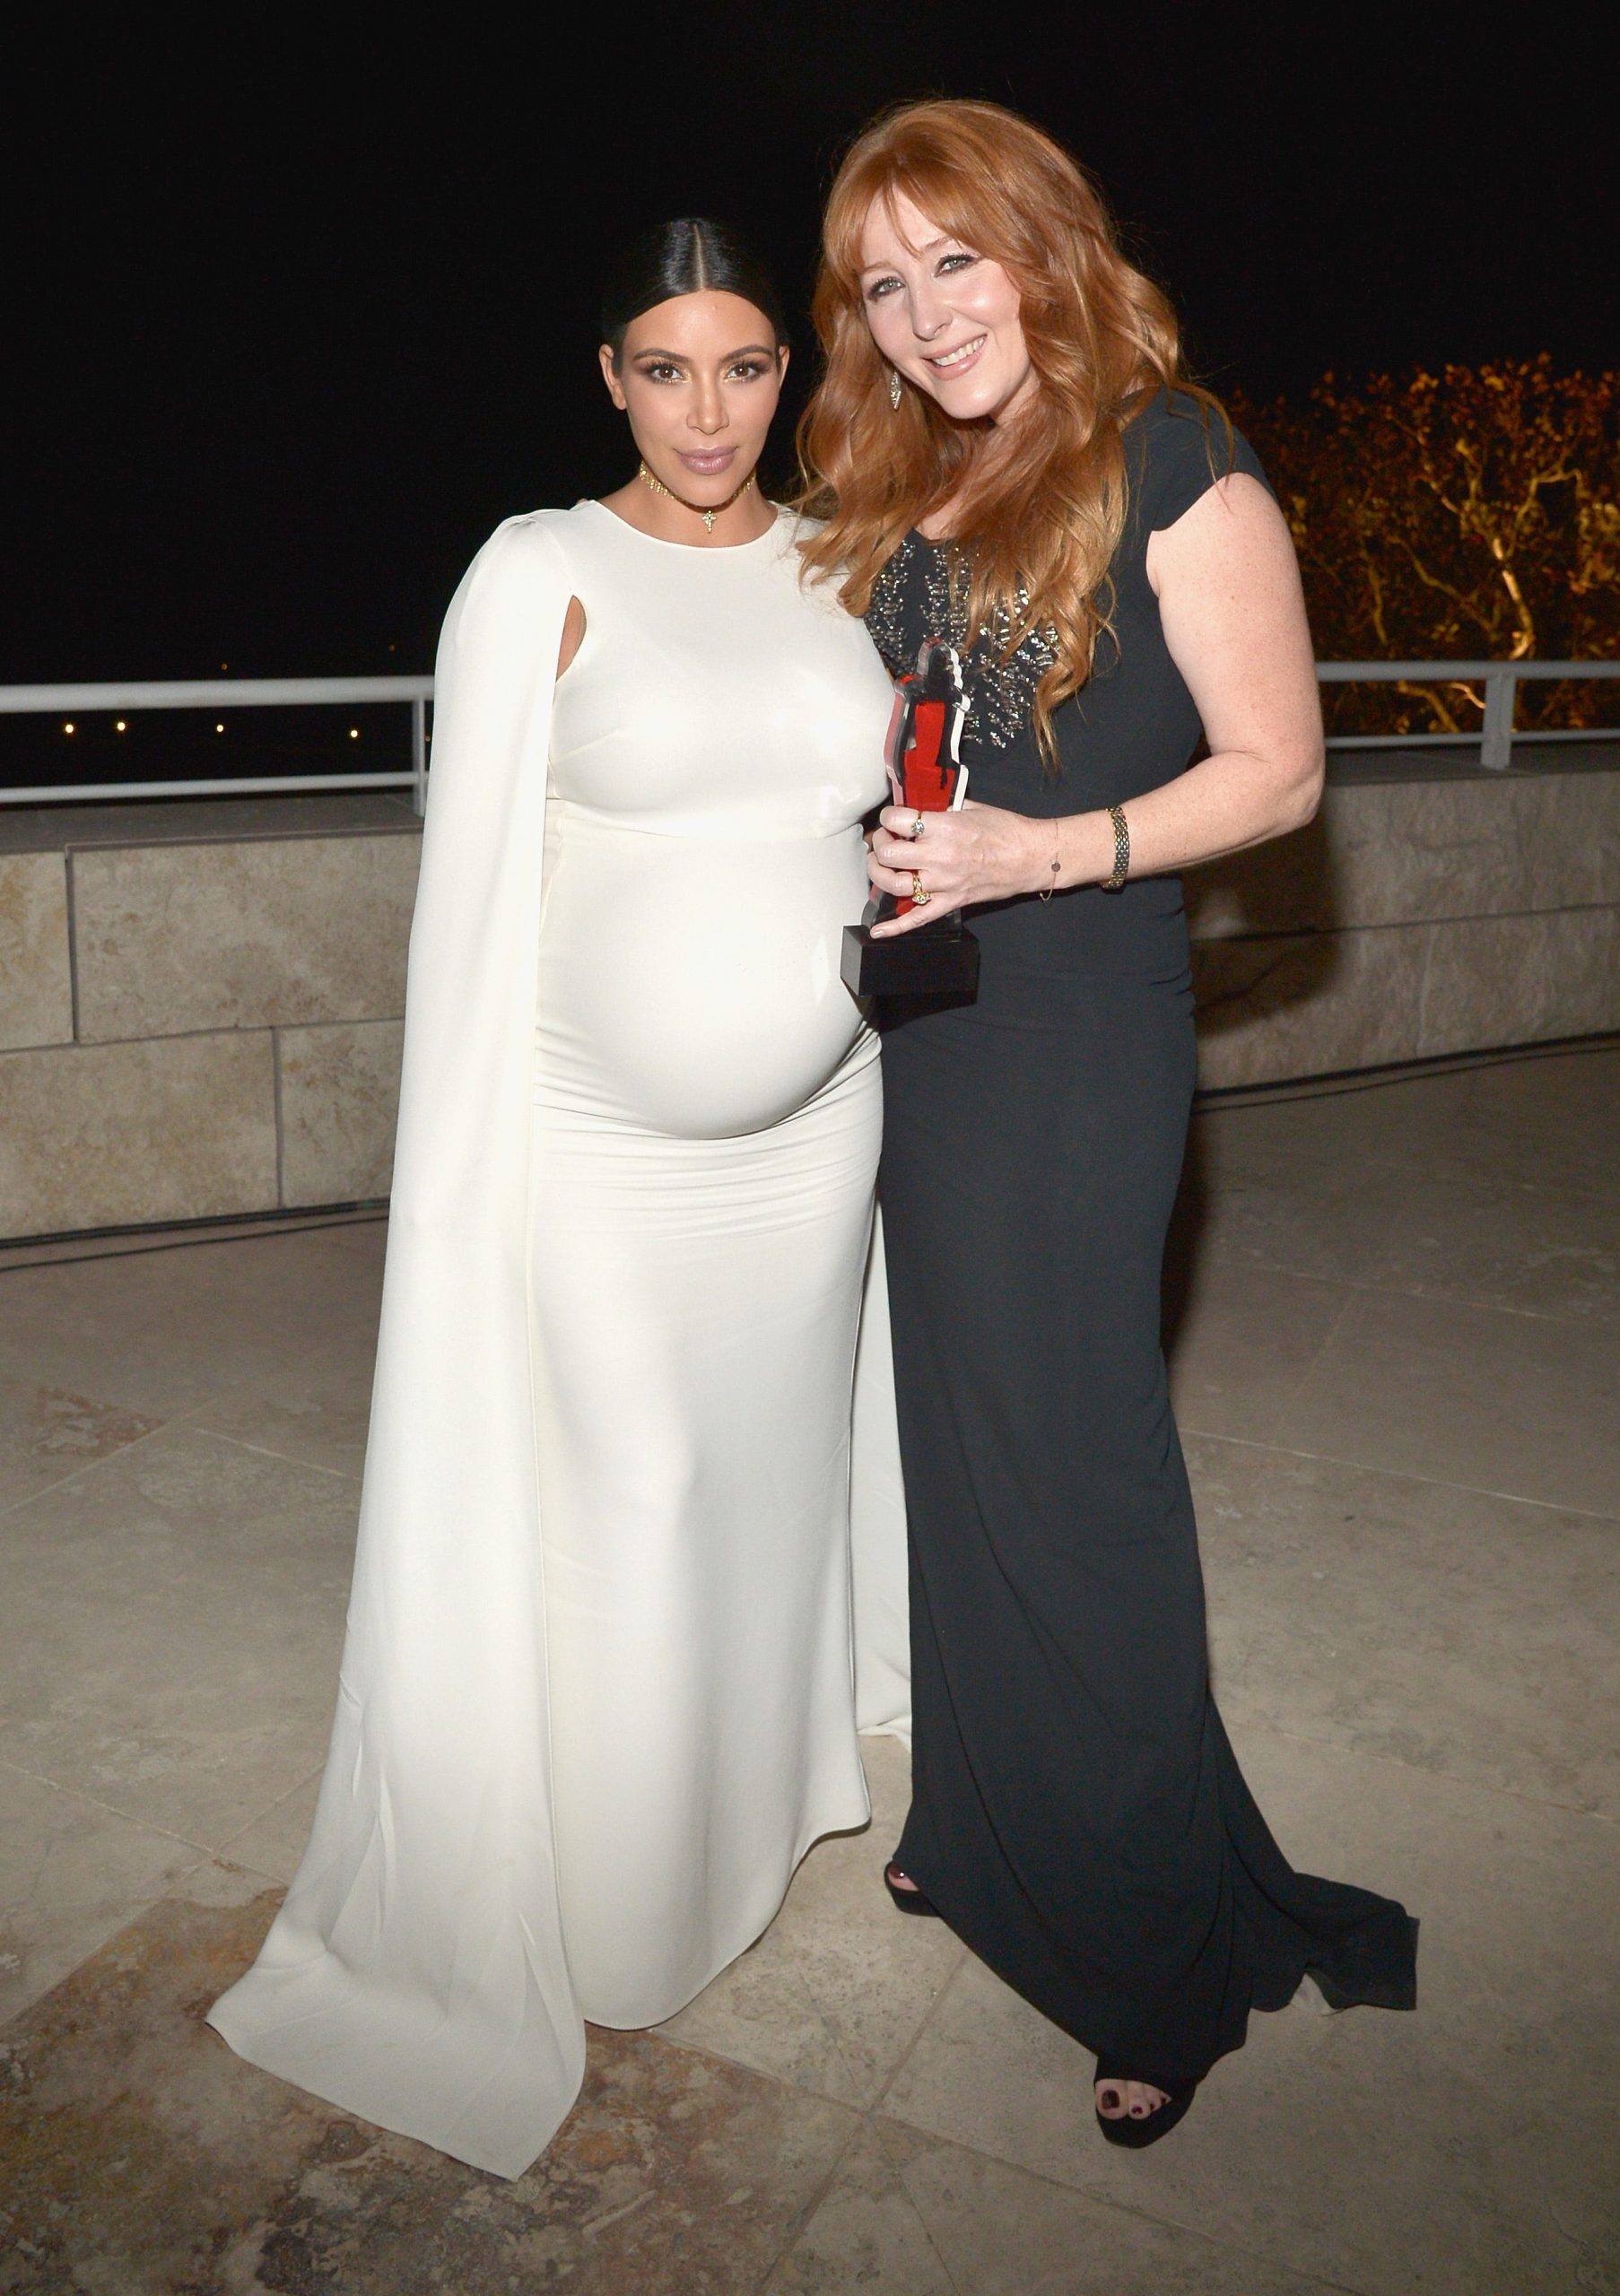 Kim Kardashian (left) and Charlotte Tilbury (right) pictured at the InStyle awards in 2015.